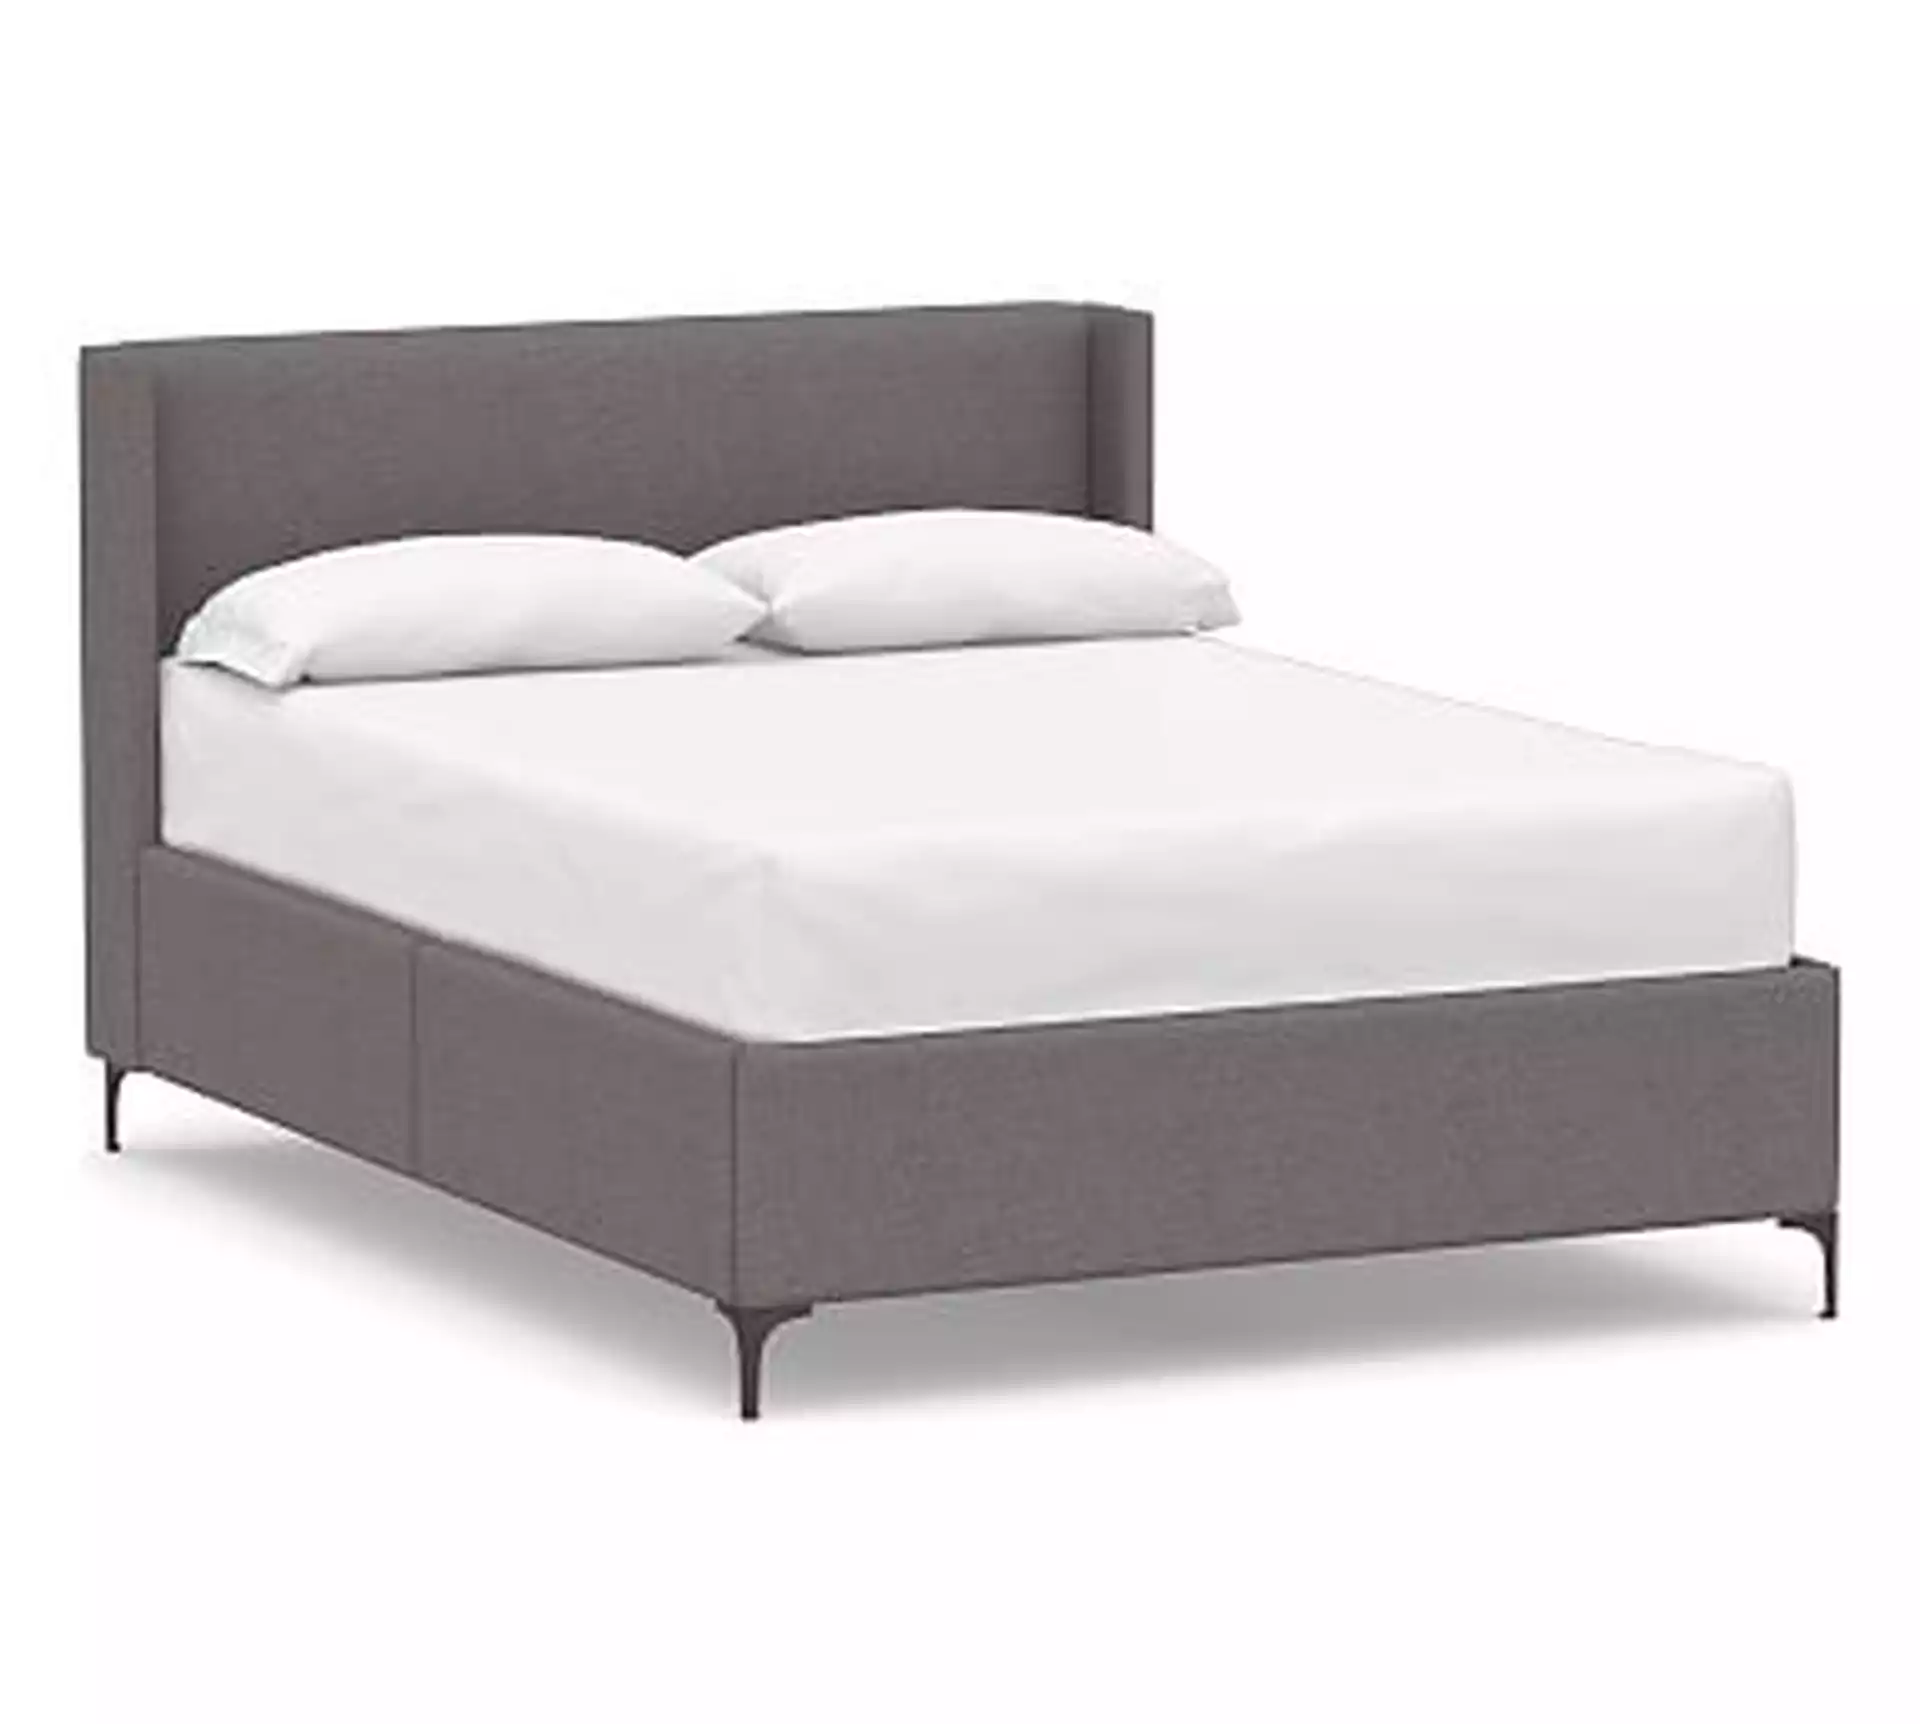 Jake Upholstered Storage Bed with Metal Base, Full, Brushed Crossweave Charcoal